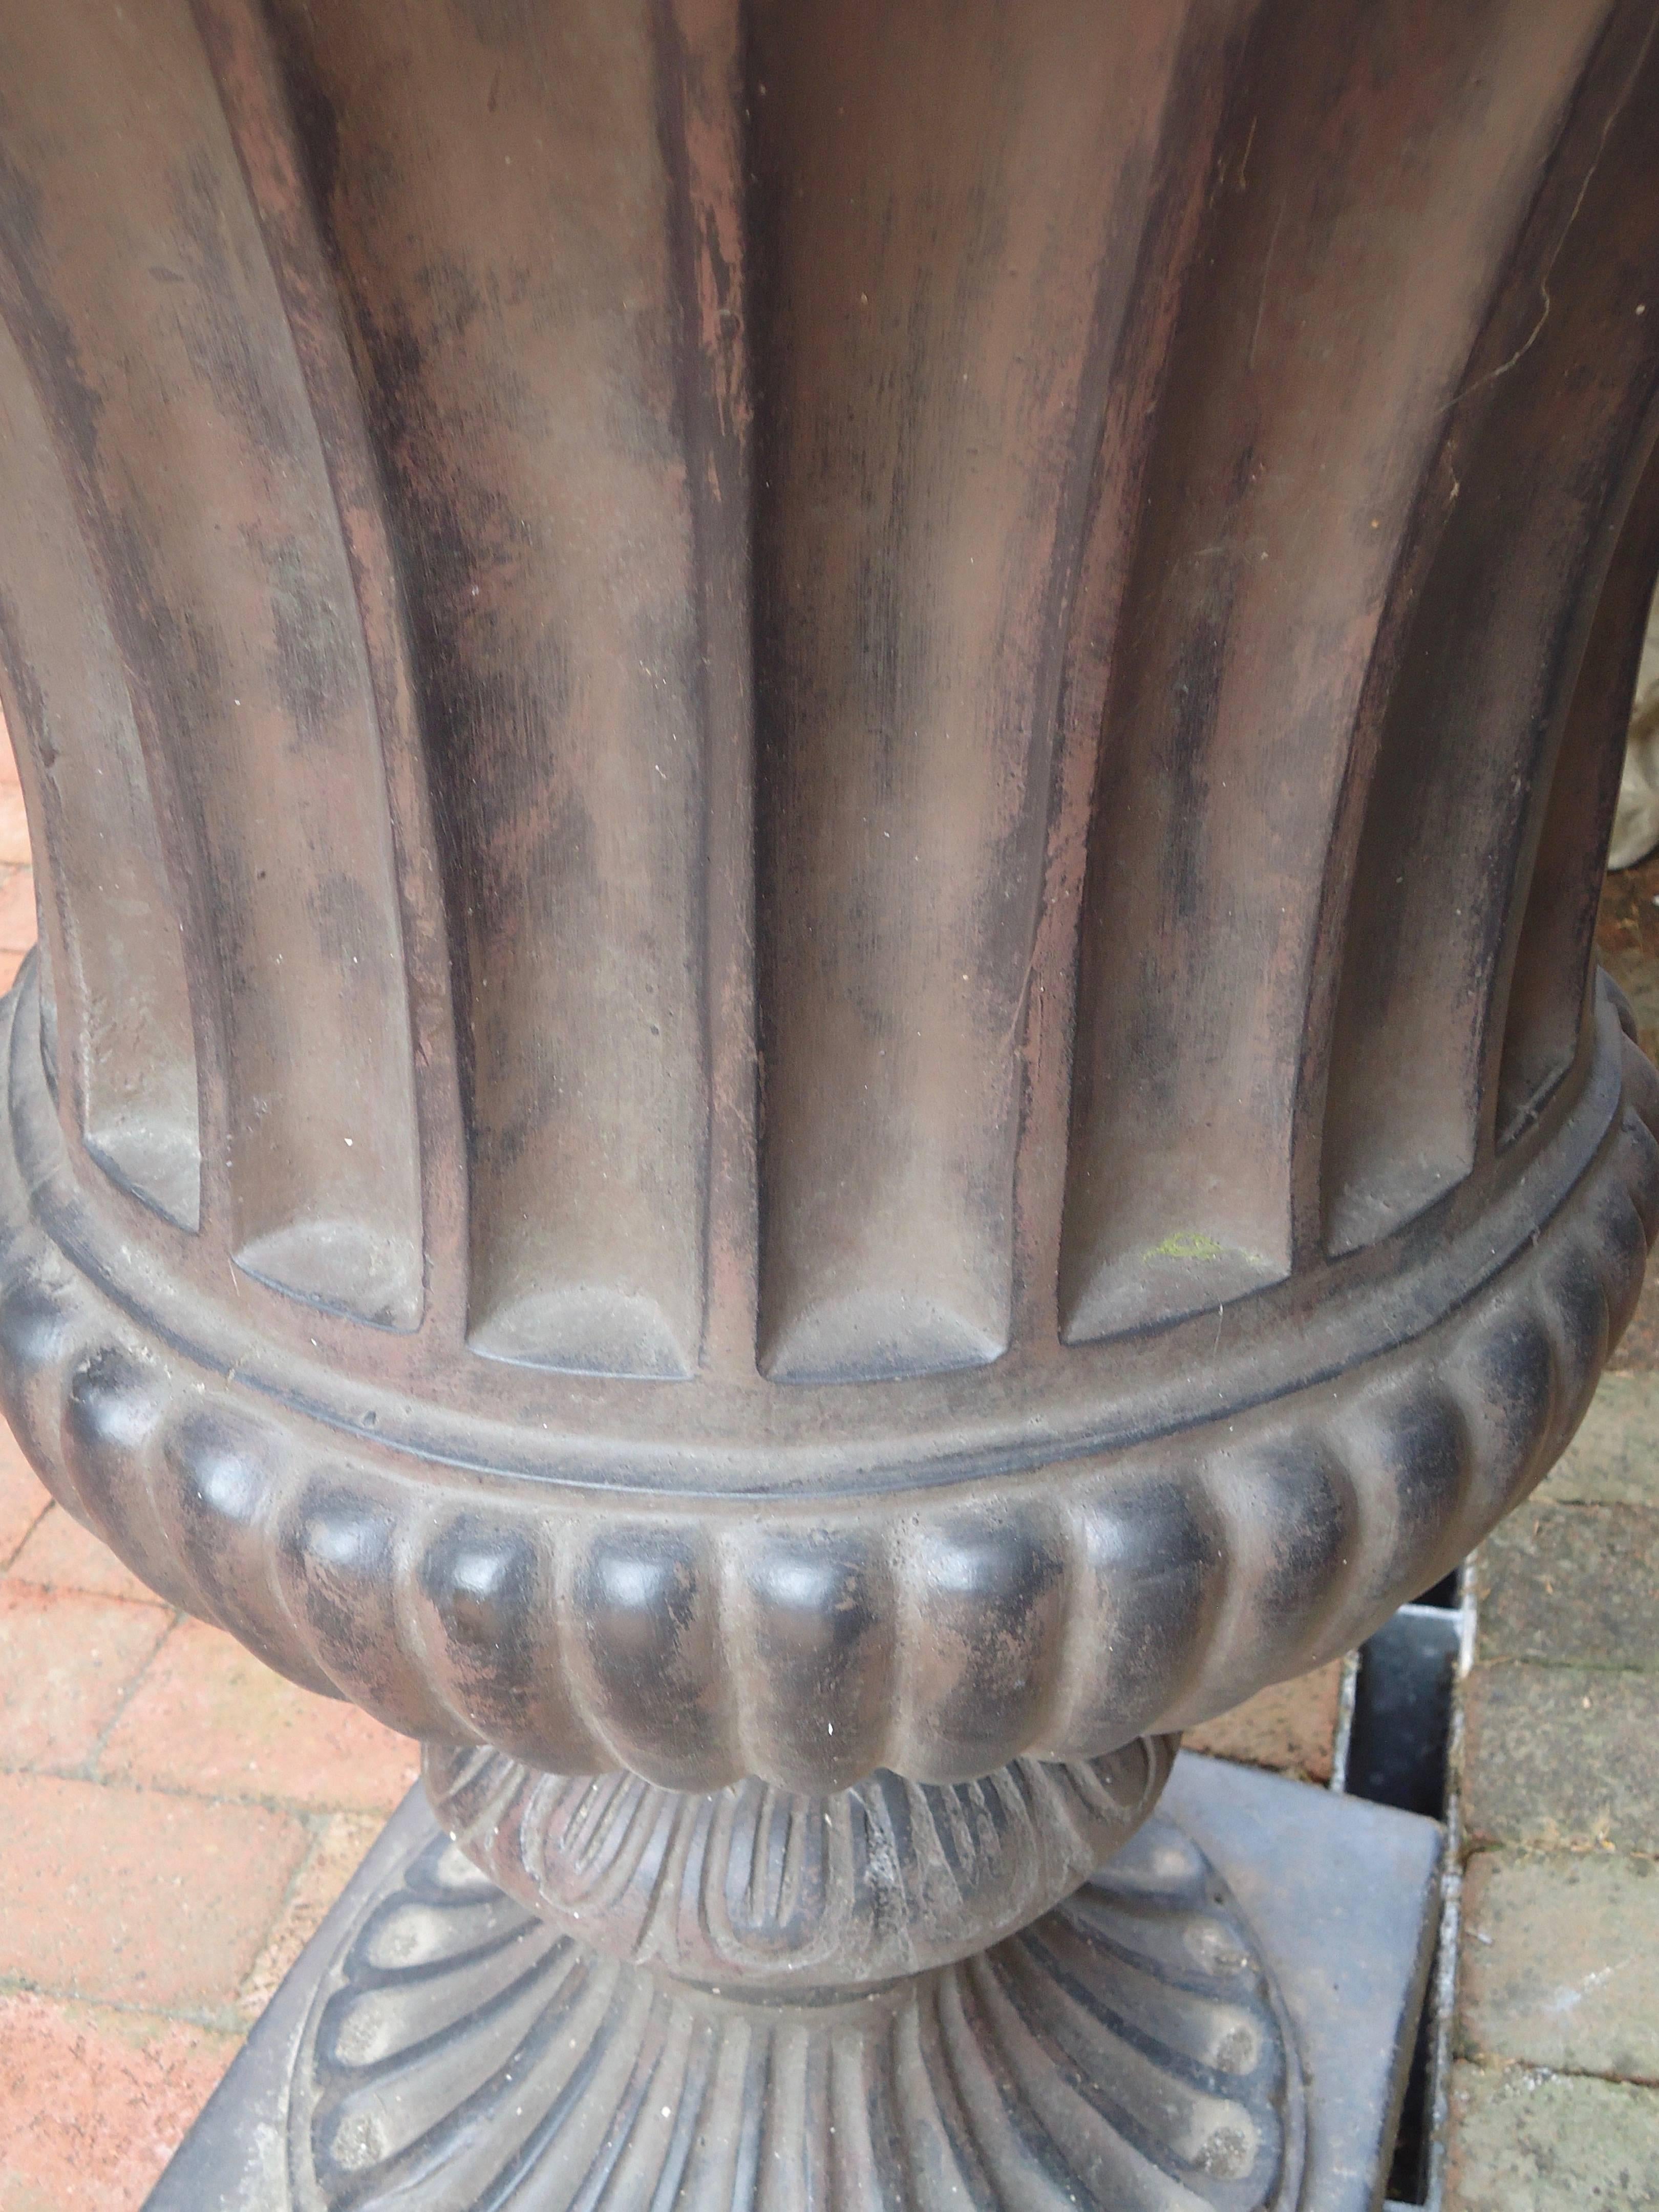 A gorgeous Classic fluted urn in fiberglass resin, hand cast from the original antique urn, having intricate details and a hand-painted faux aged black iron finish. This high quality medium is impervious to weather, durable and maintenance free.